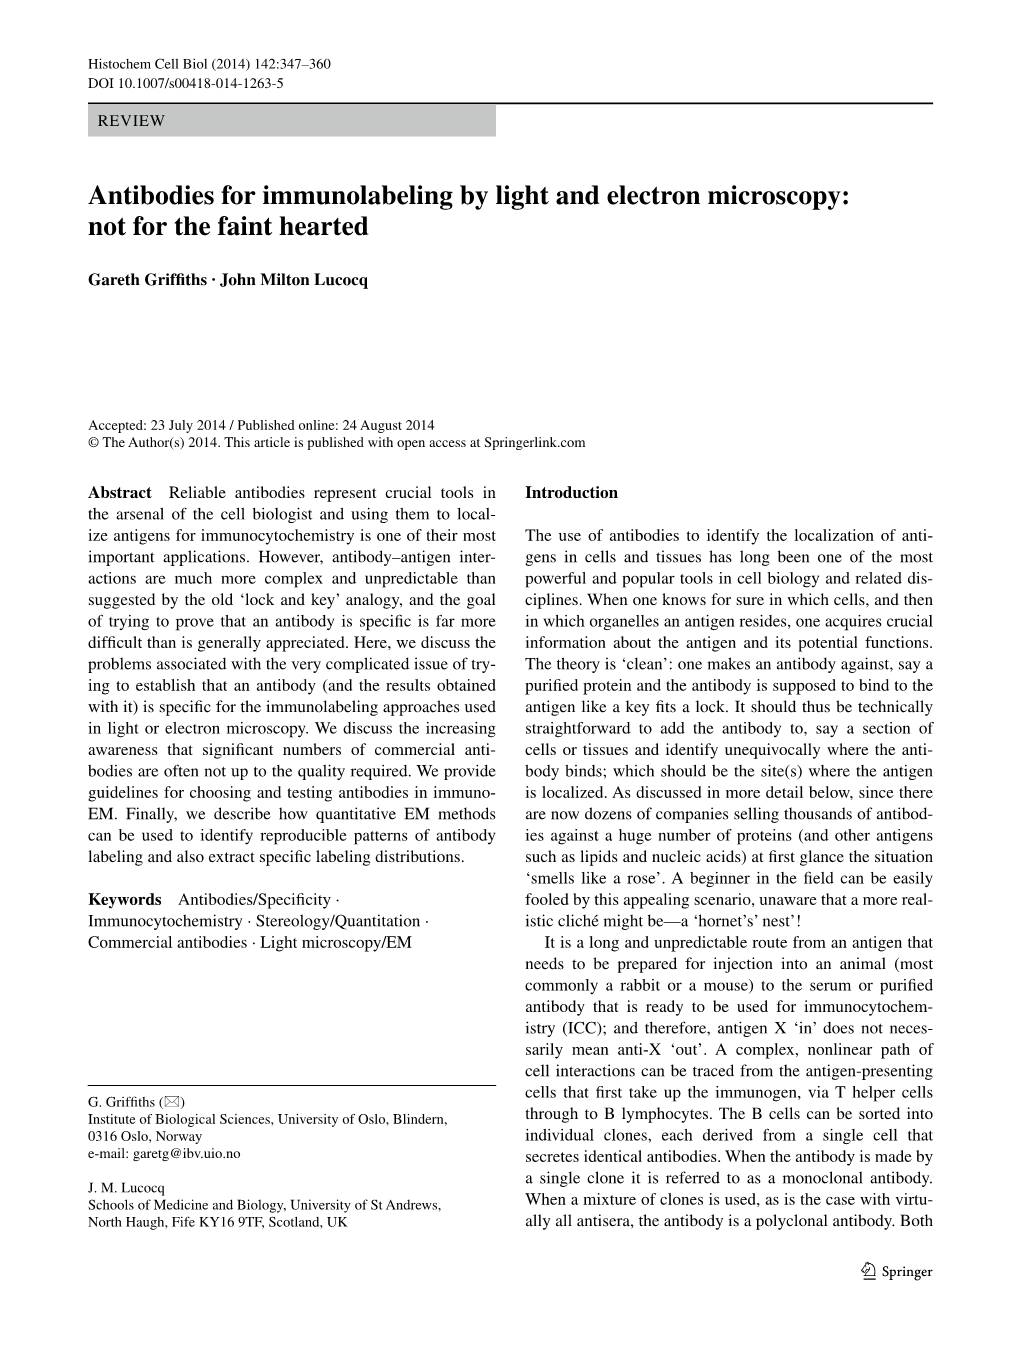 Antibodies for Immunolabeling by Light and Electron Microscopy: Not for the Faint Hearted